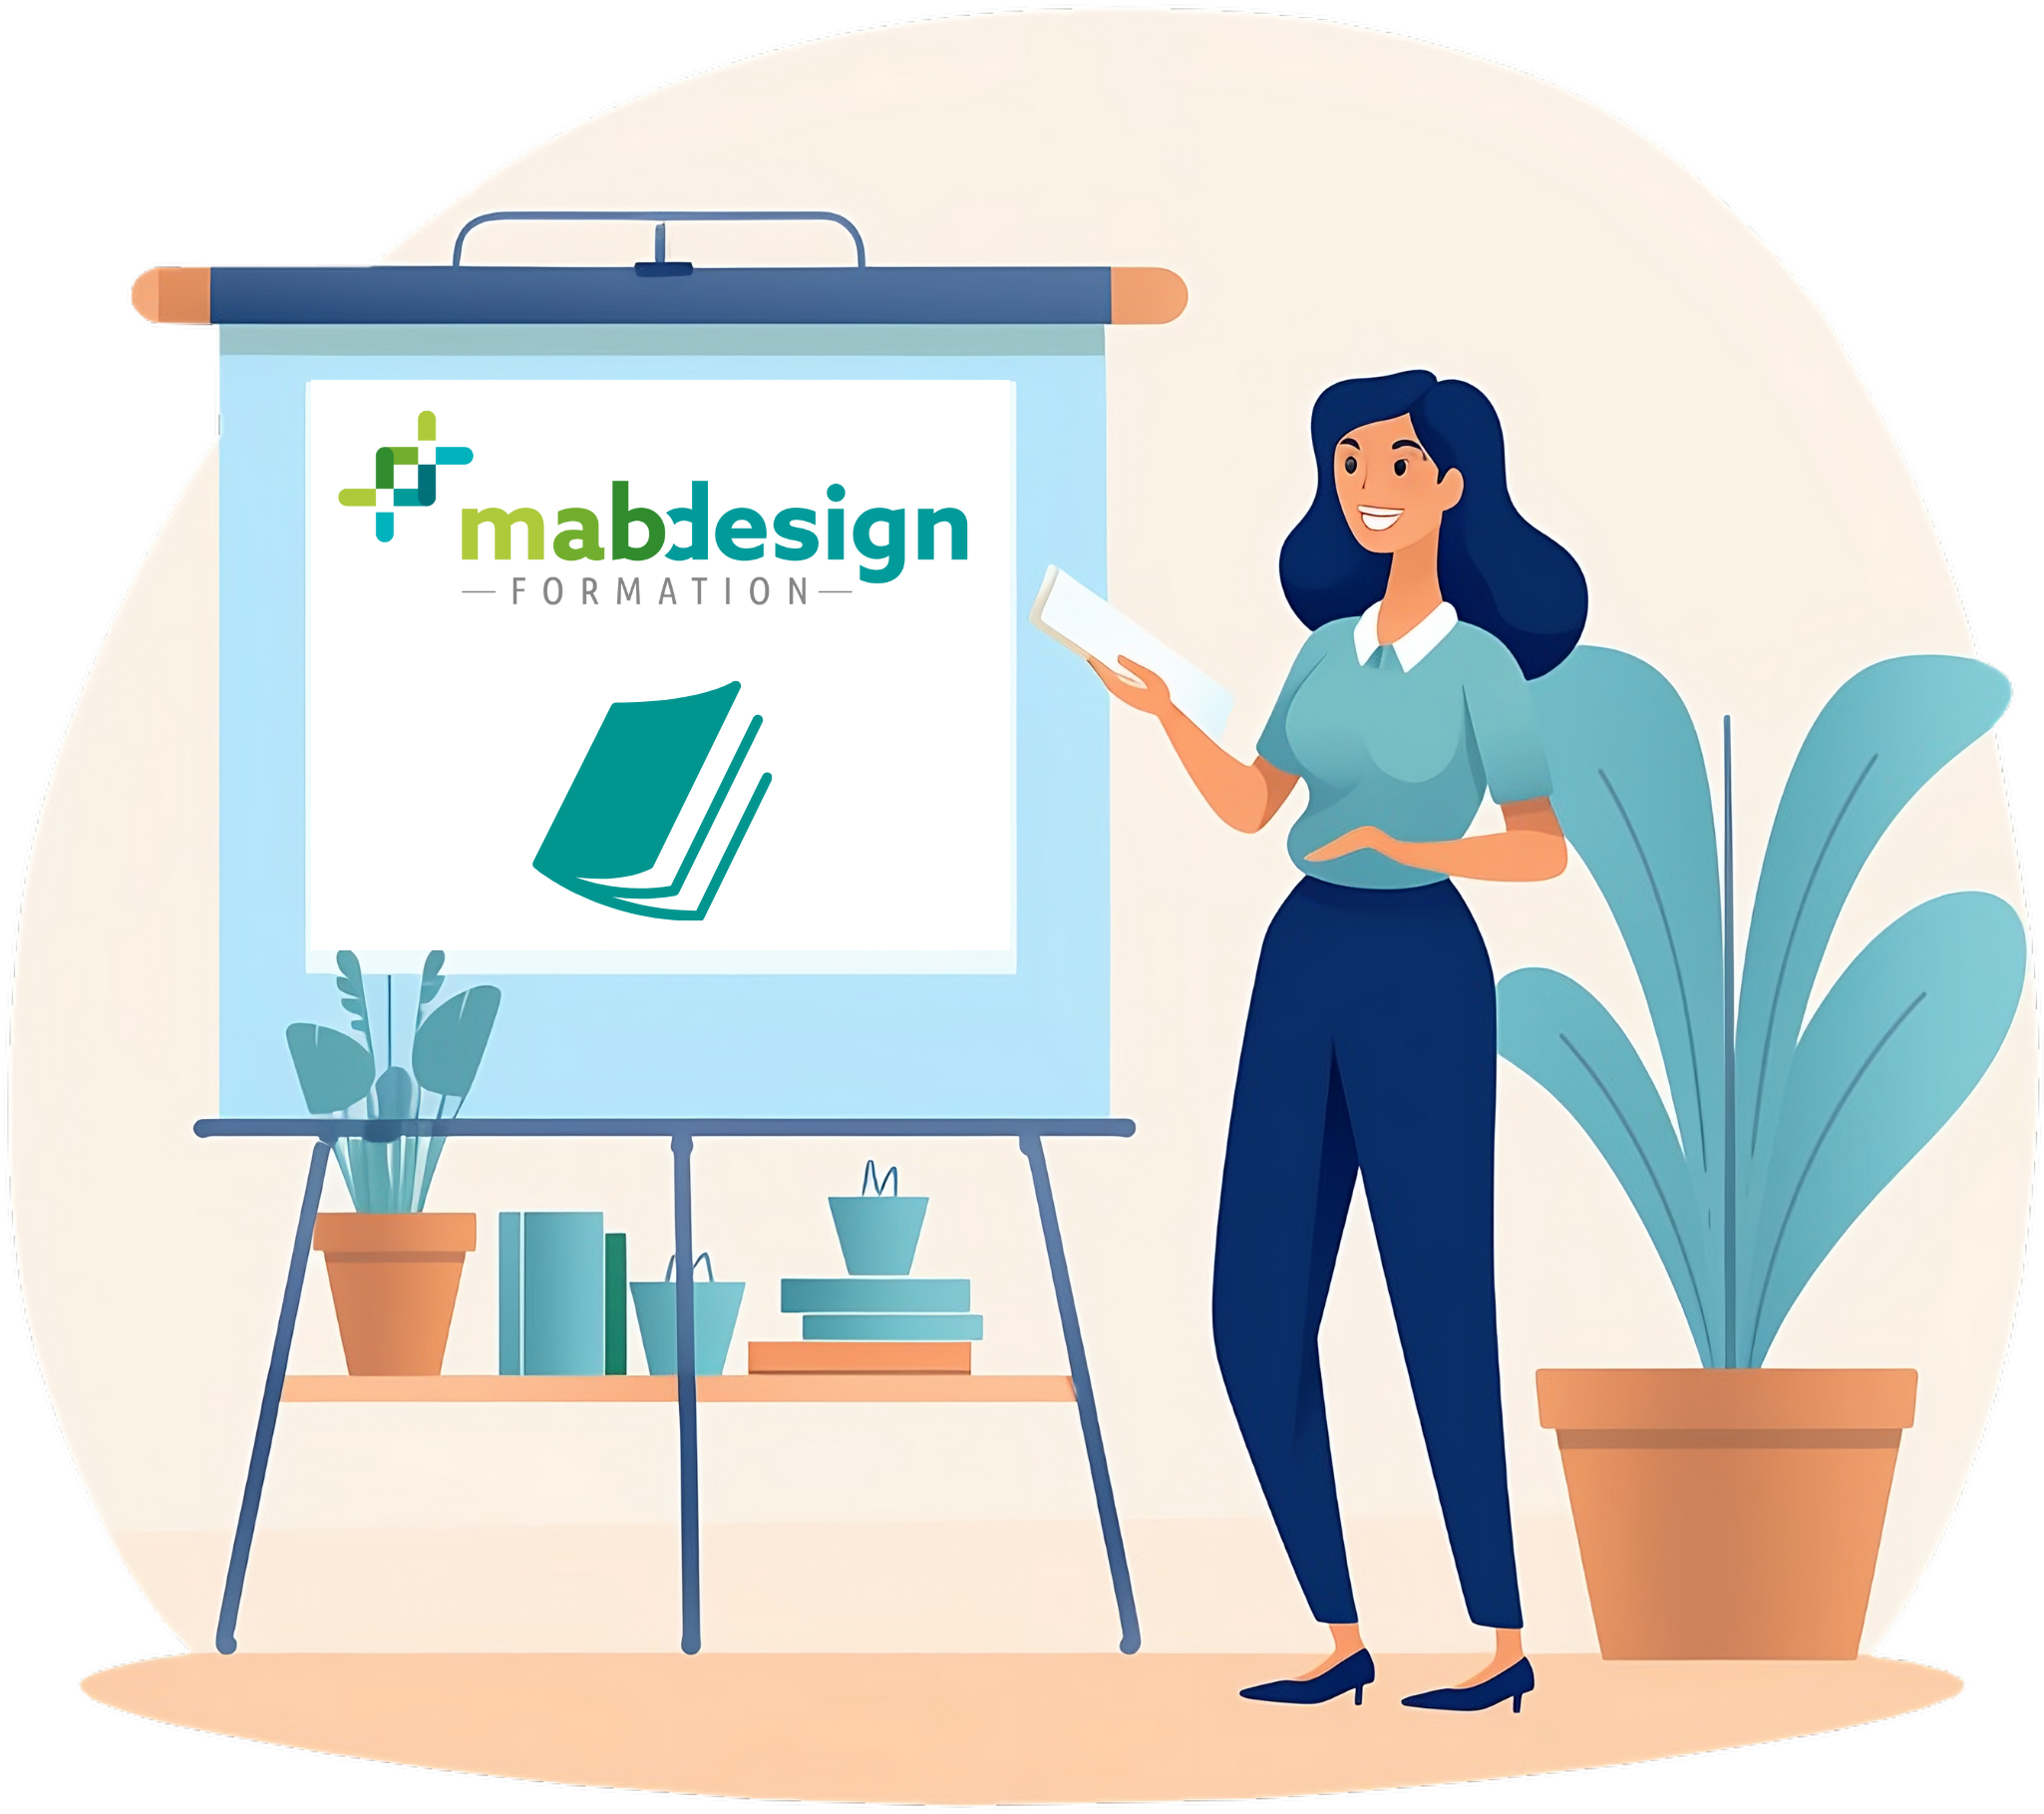 formations continues professionnelles ; mabdesign formation ; experts ; formateurs ; biomédicaments ; MabDesign